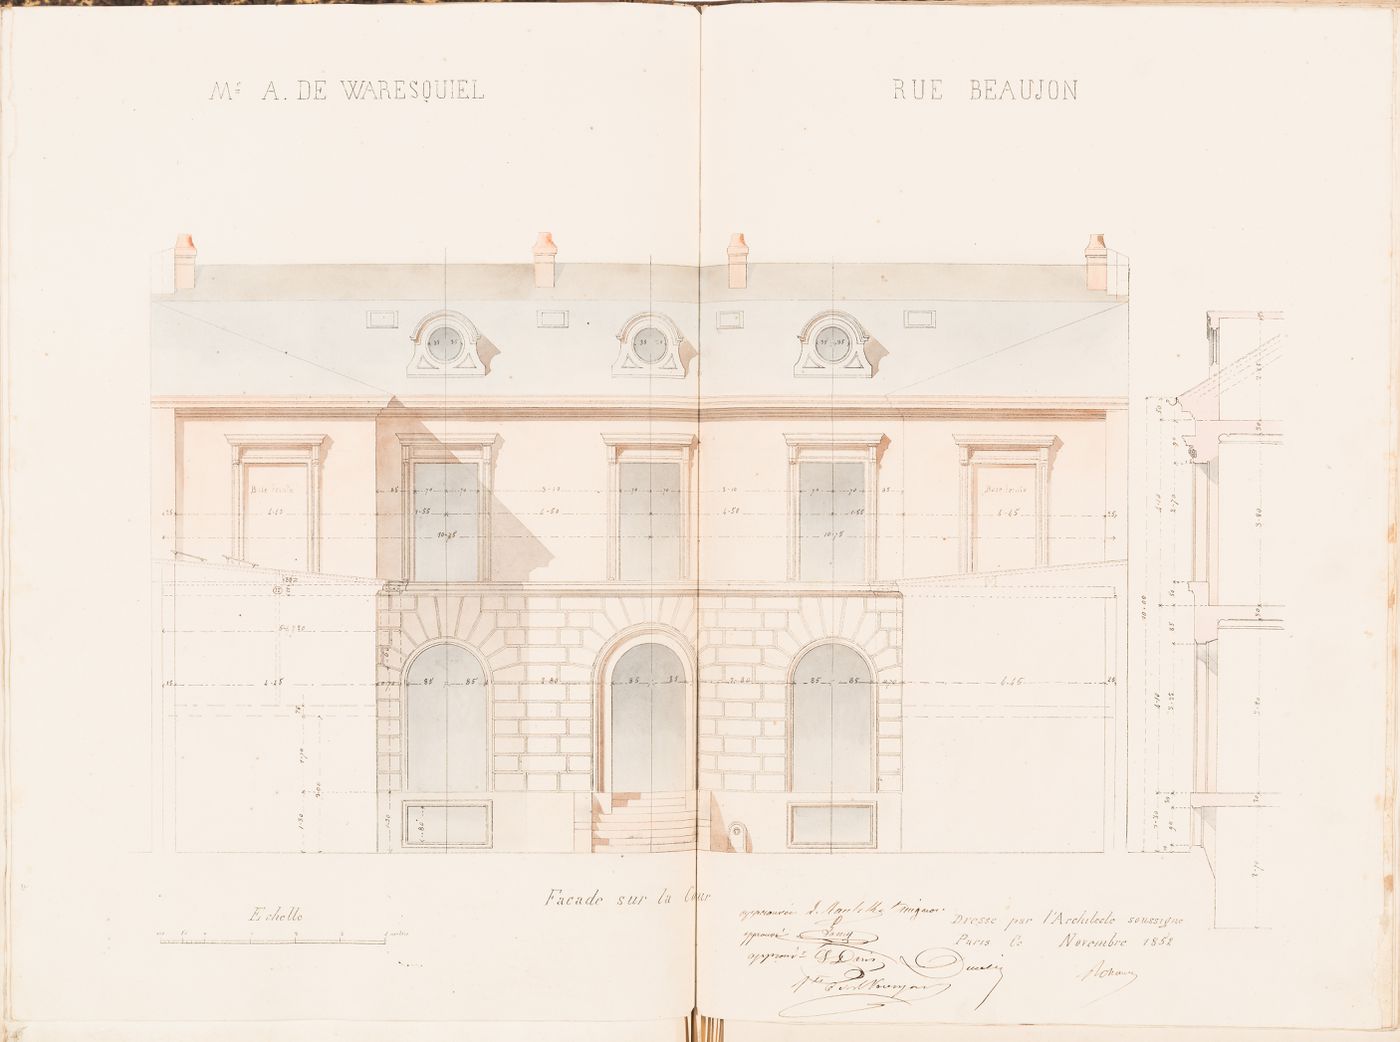 Contract drawing for a house for Monsieur A. Waresquiel, rue Beaujon, Paris: Elevation for the principal façade with a partial section